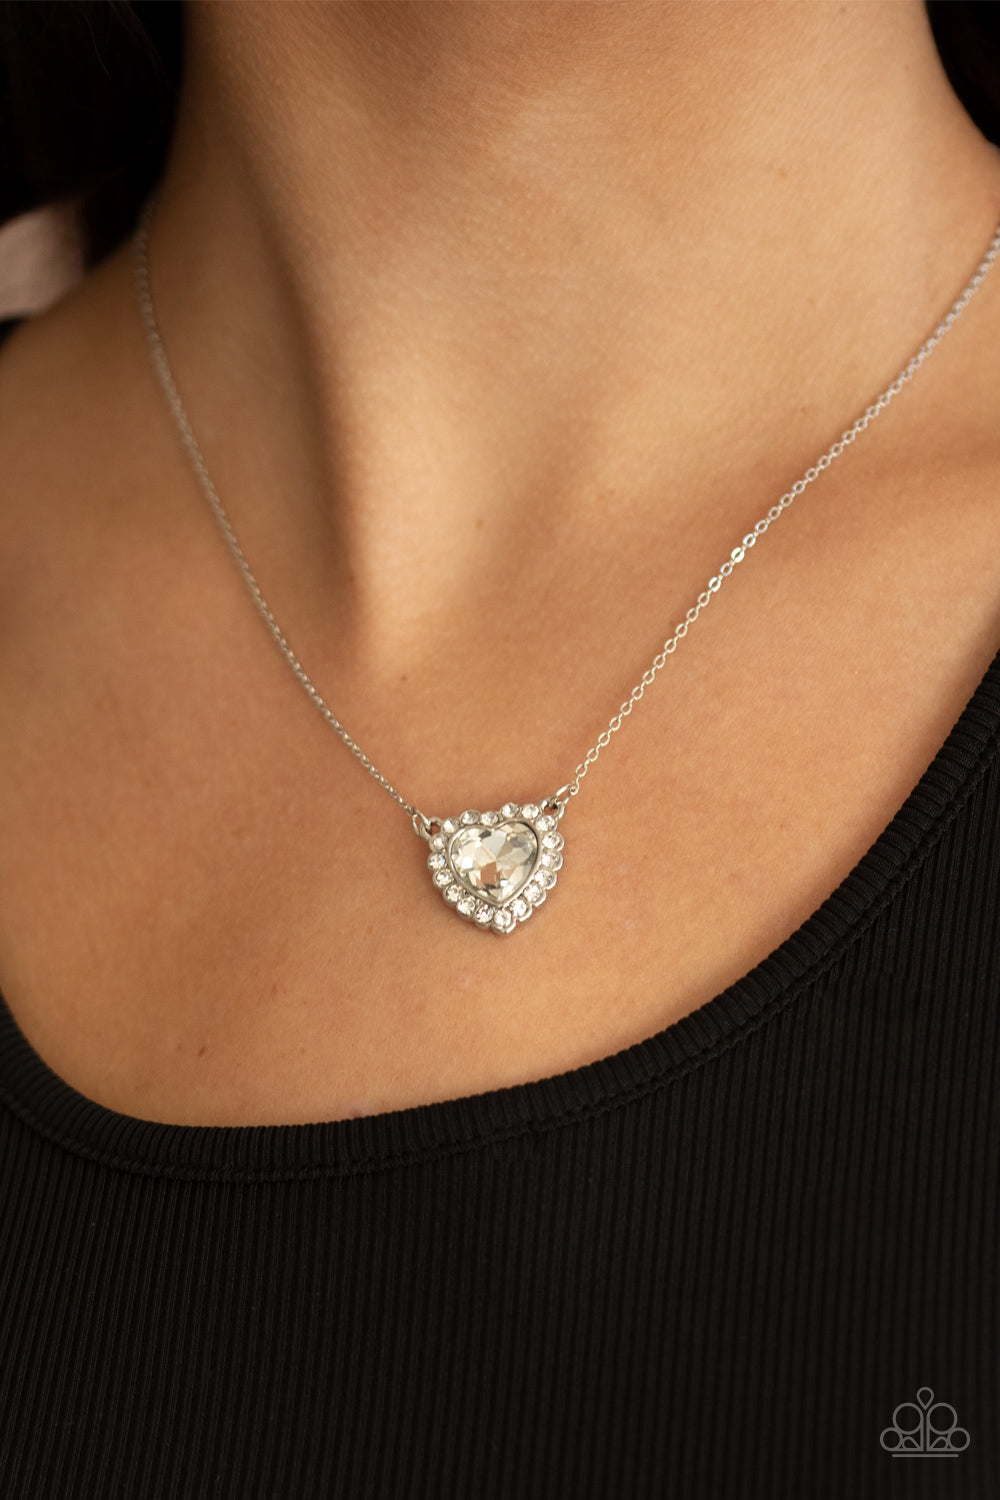 Out of the GLITTERY-ness of Your Heart - White gem heart shaped necklace